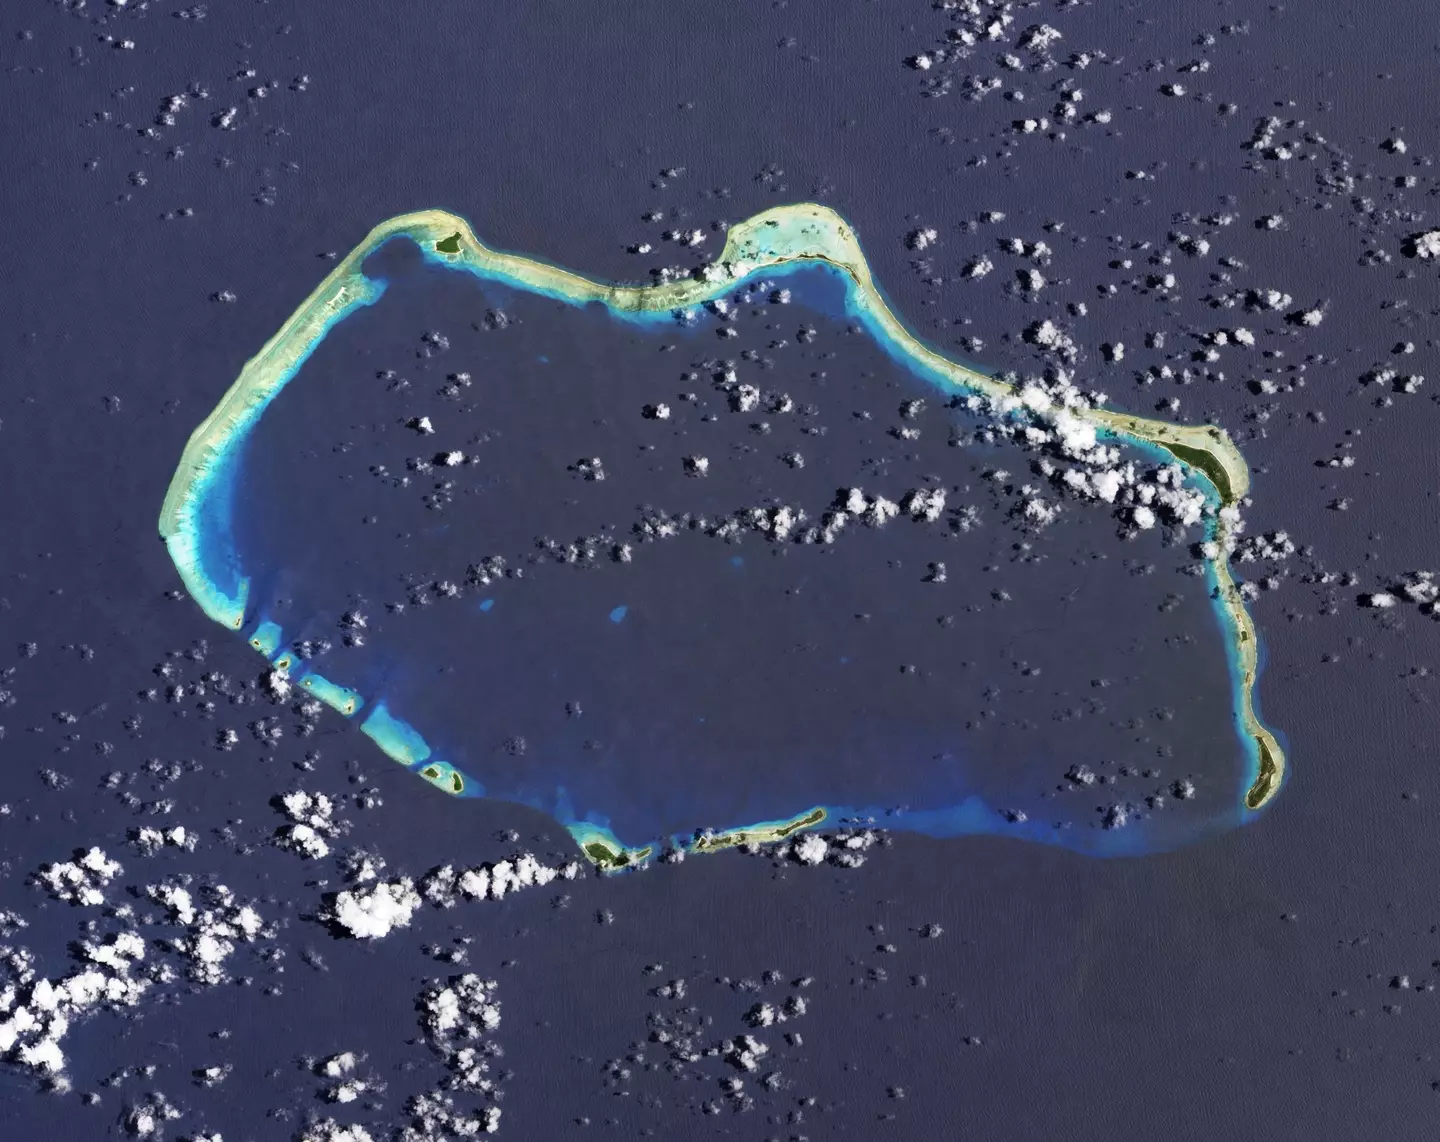 Bikini Atoll, where the US conducted a series of nuclear tests, the part in the upper left where it looks like a chunk is missing is where this 15 megaton bomb was detonated.